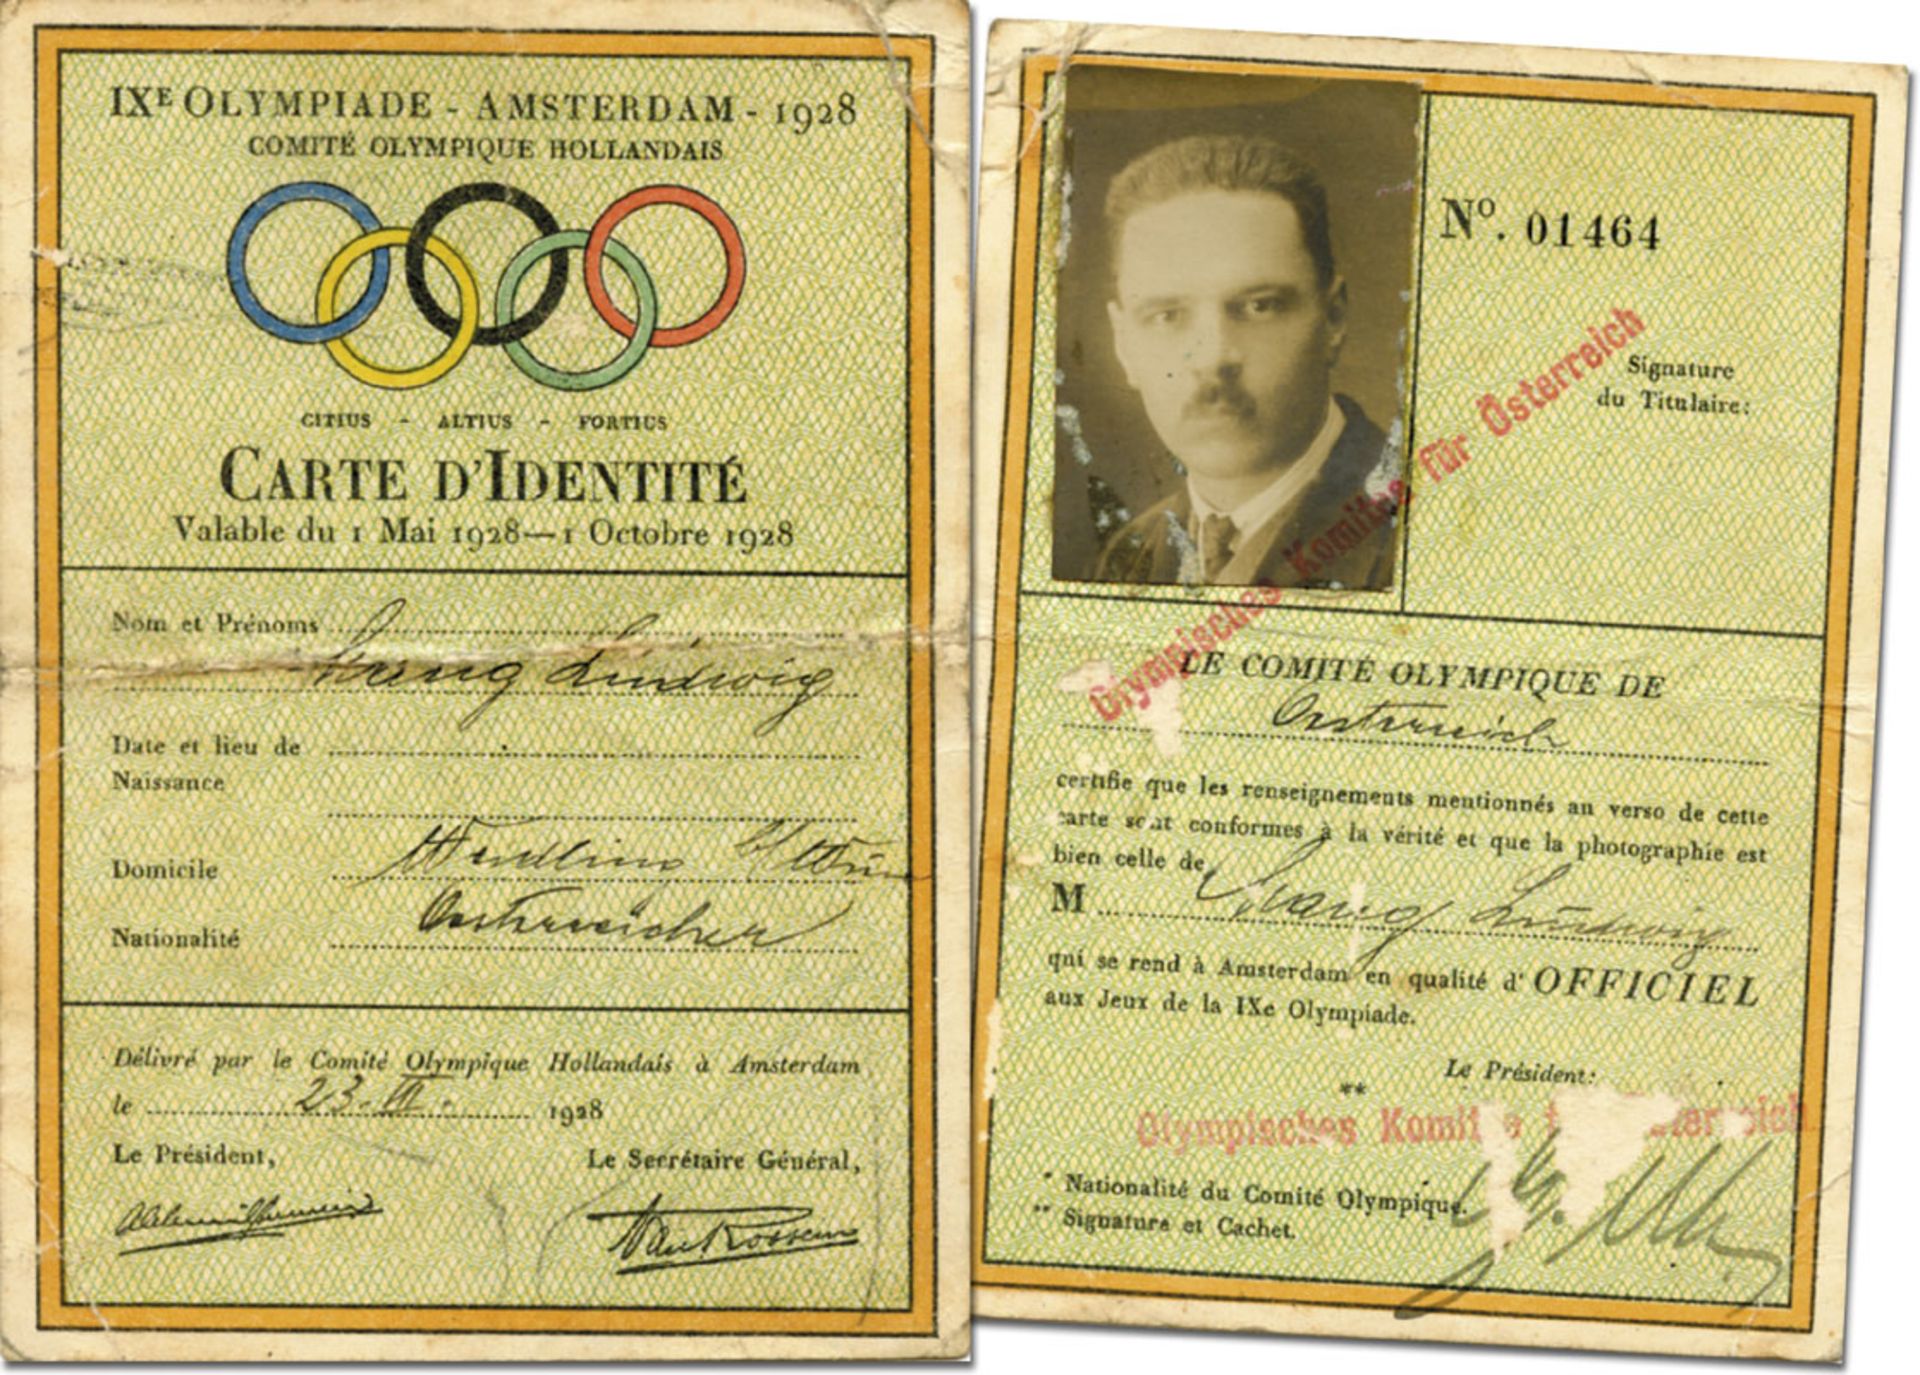 Olympic Games Amsterdam 1928. ID-Card for athlets - Carte d´Identité IXe Olympiade Amsterdam 1928. O